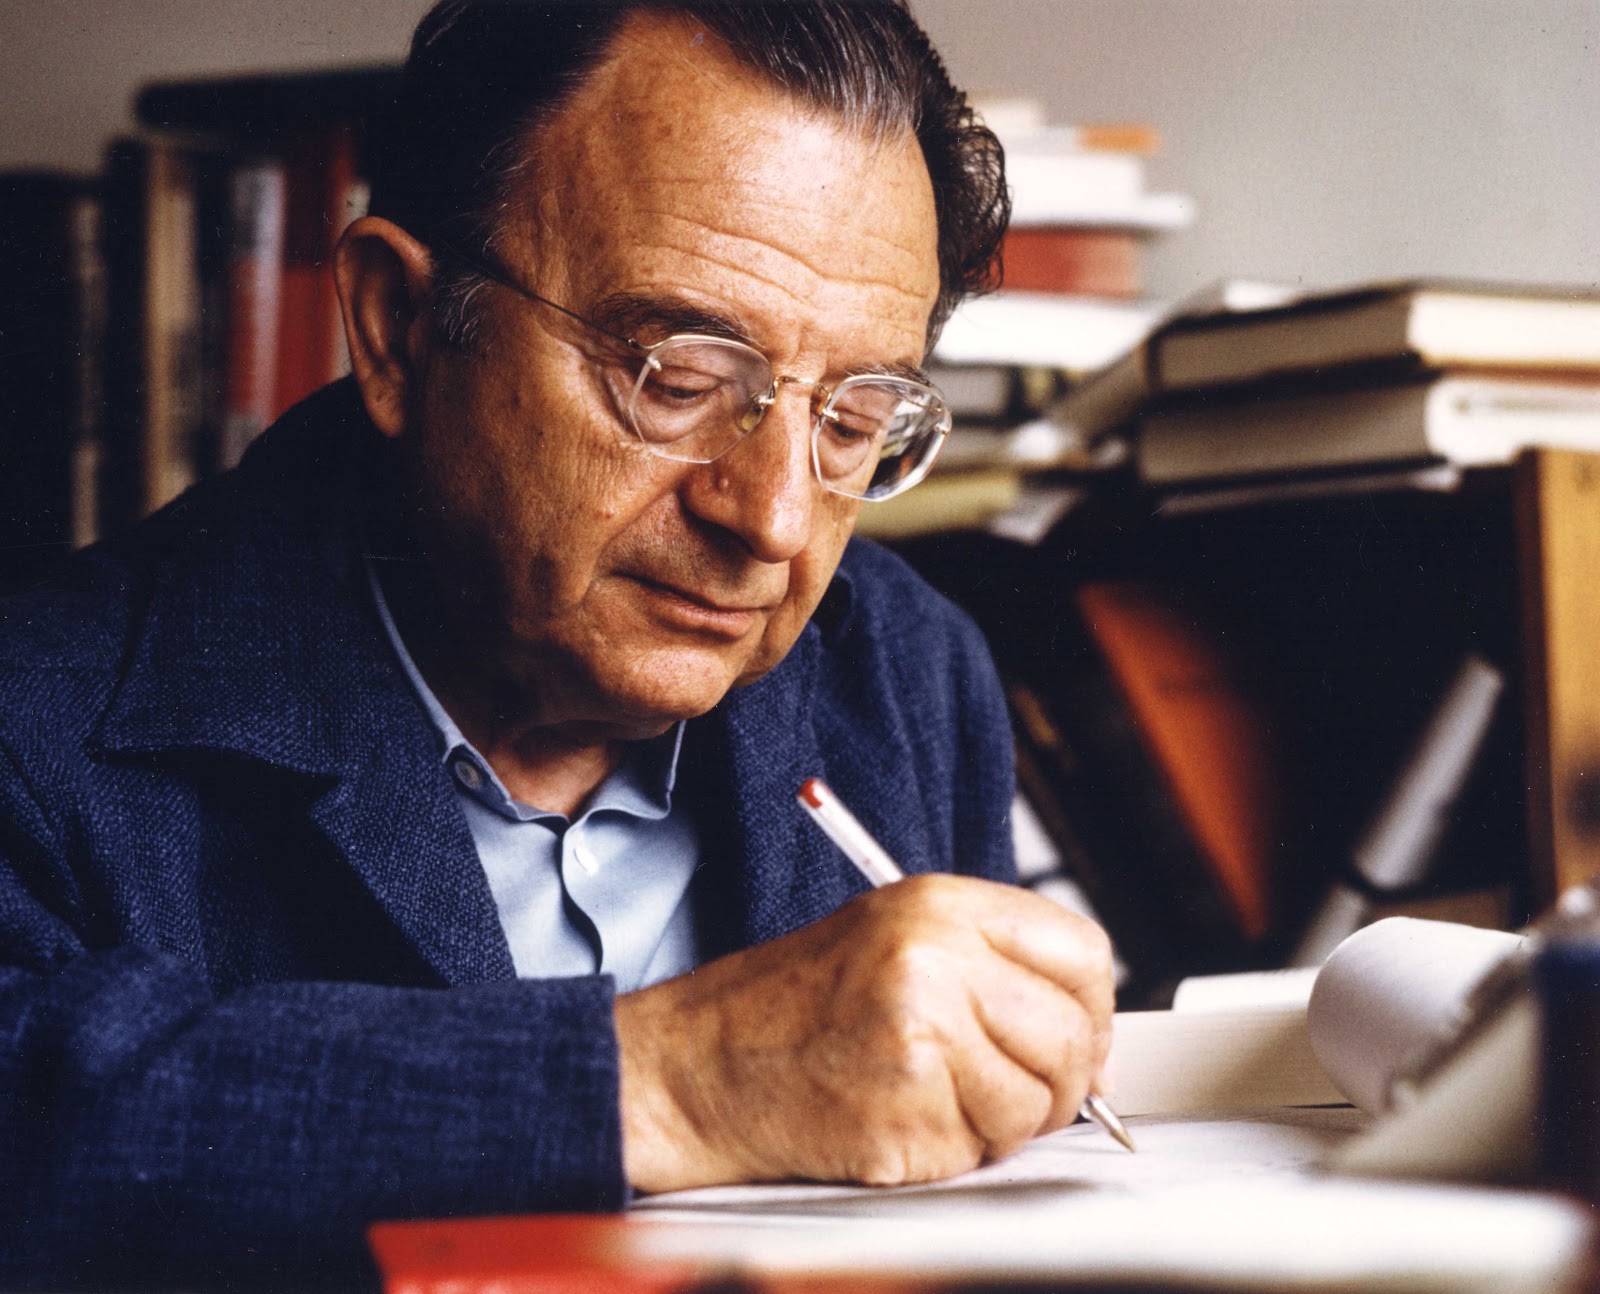 This is a color image of Erich Fromm taken in 1974. He is sitting at a desk writing on a piece of paper. A red pen is held in his right hand. He is wearing a blue shirt with a blue jacket on top. He is wearing eye glasses and he is looking down at the paper as he writes. There are books piled in the background.